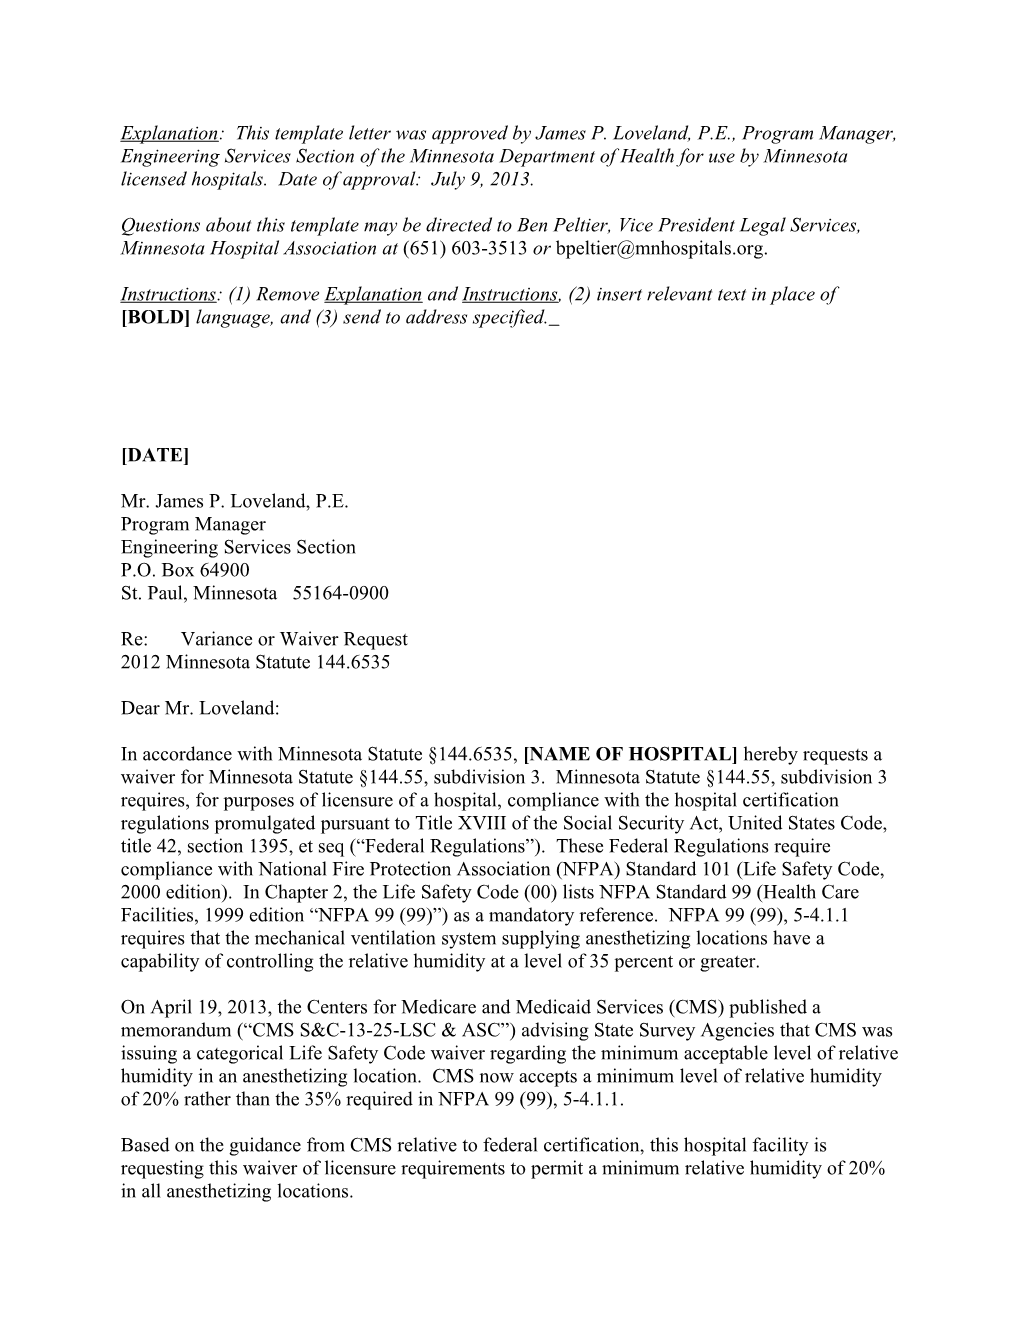 Explanation: This Template Letter Was Approved by James P. Loveland, P.E., Program Manager